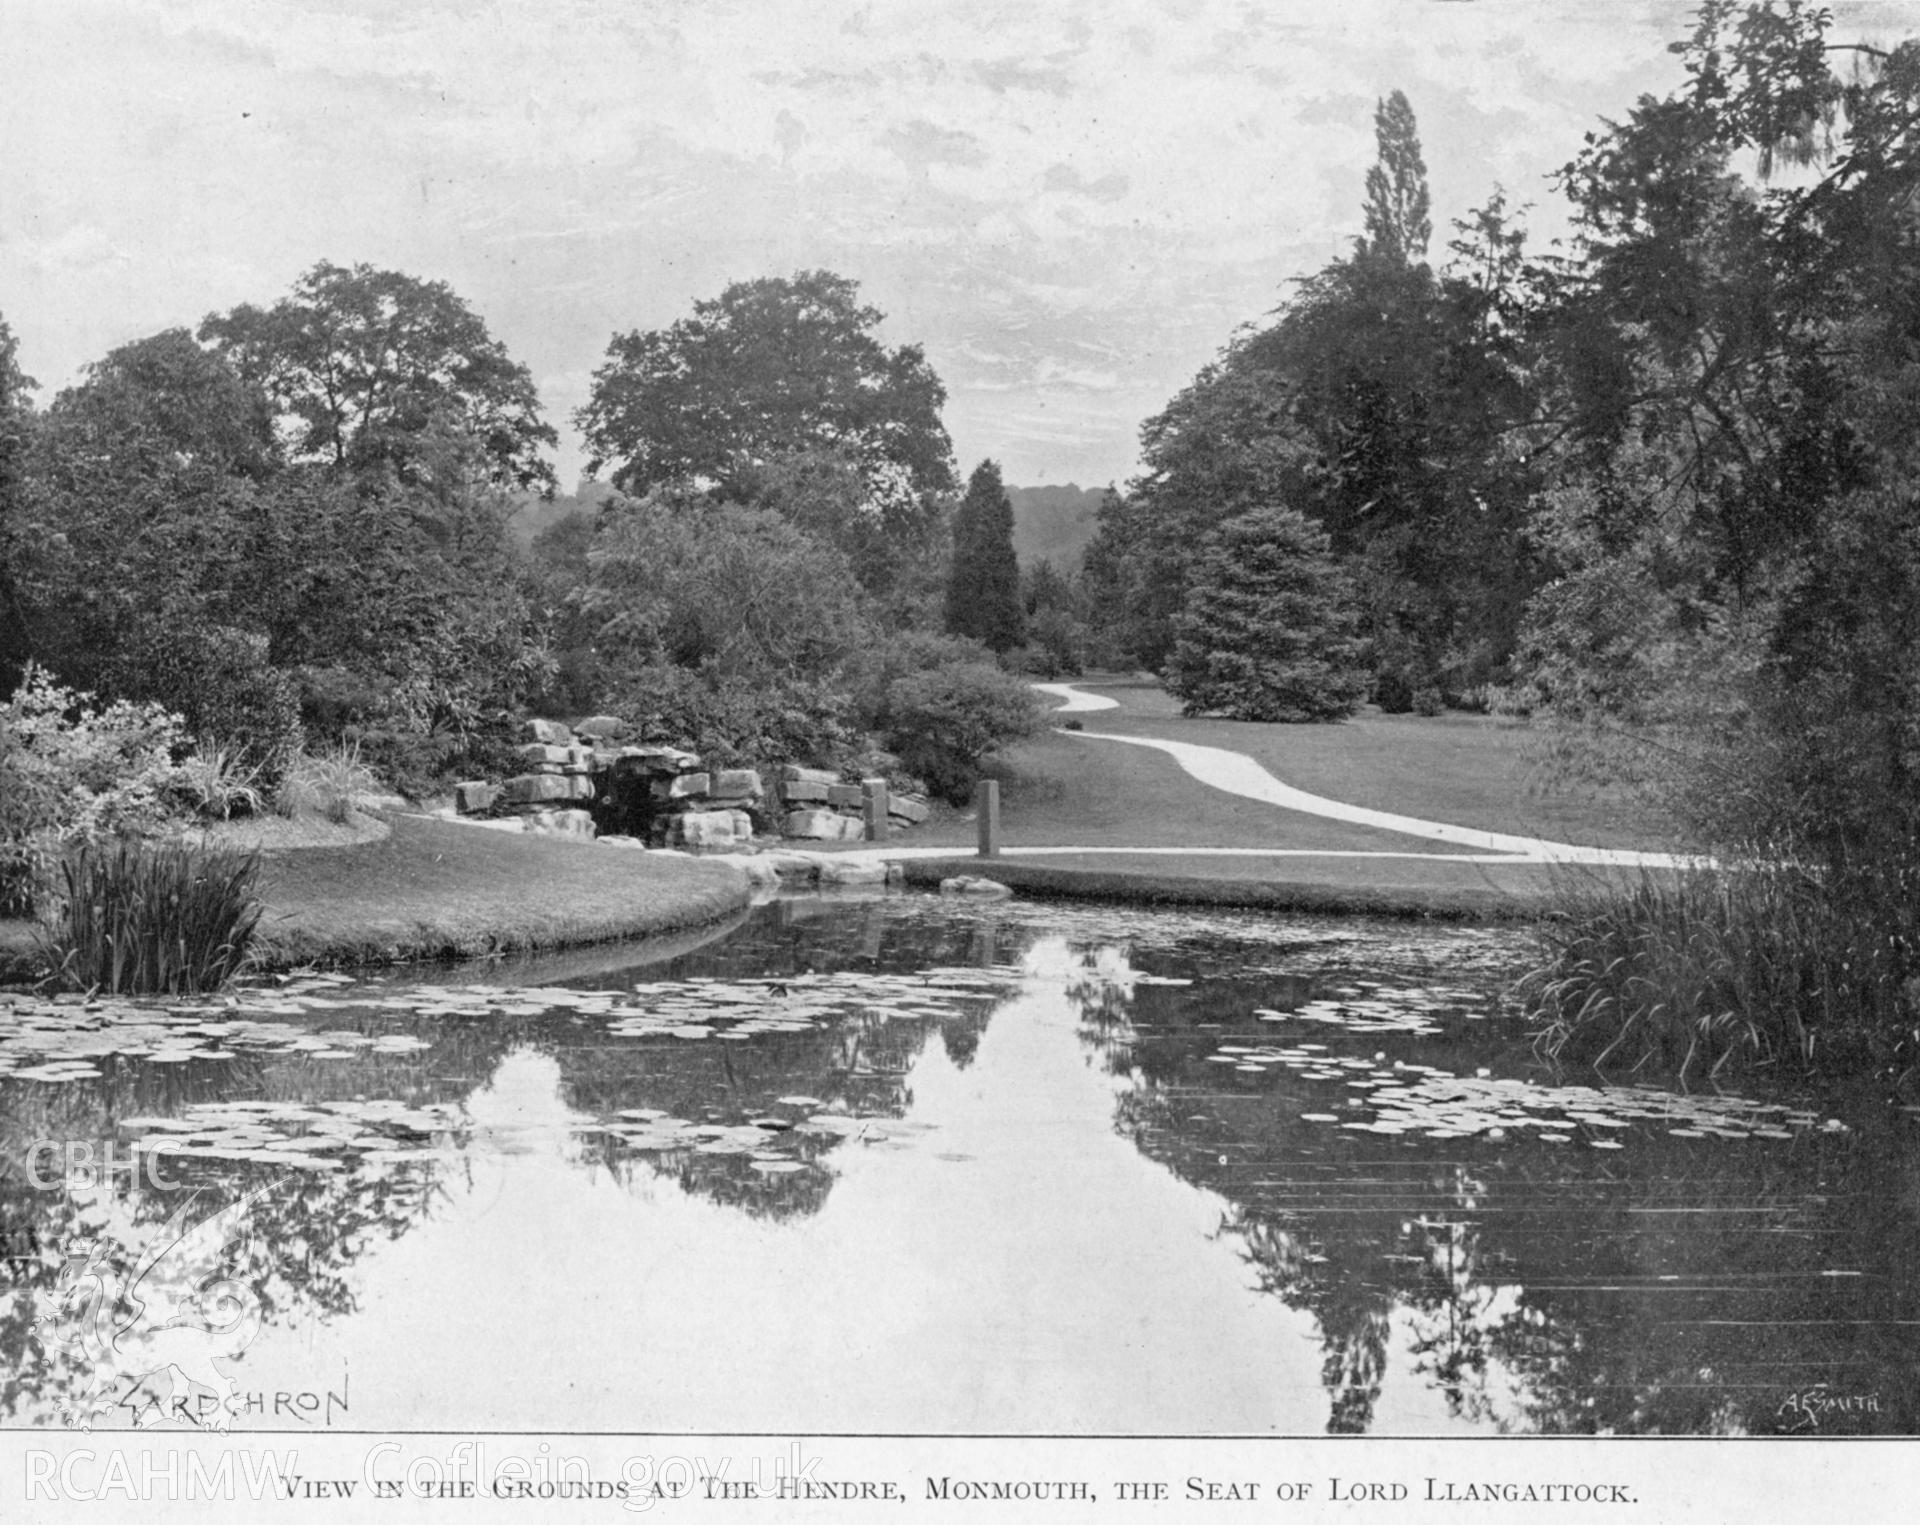 Digital copy of a black and white photograph from The Gardeners'Chronicle showing view in the grounds at The Hendre, Monmouth.